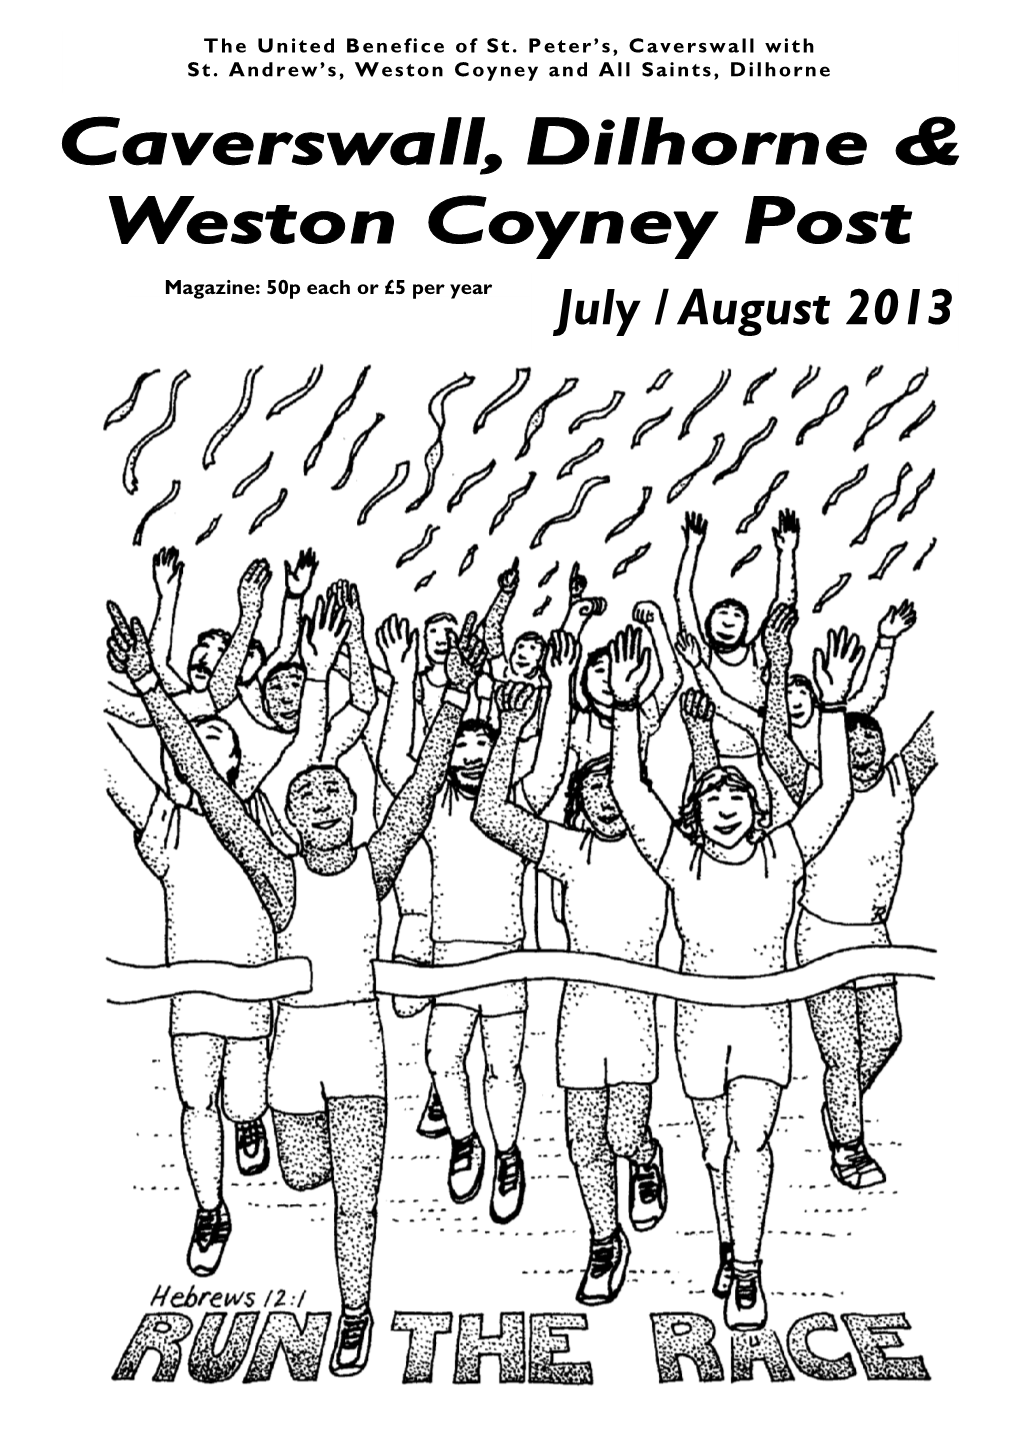 July / August 2013 PAGE 2 CAVERSWALL, DILHORNE & WESTON COYNEY POS T